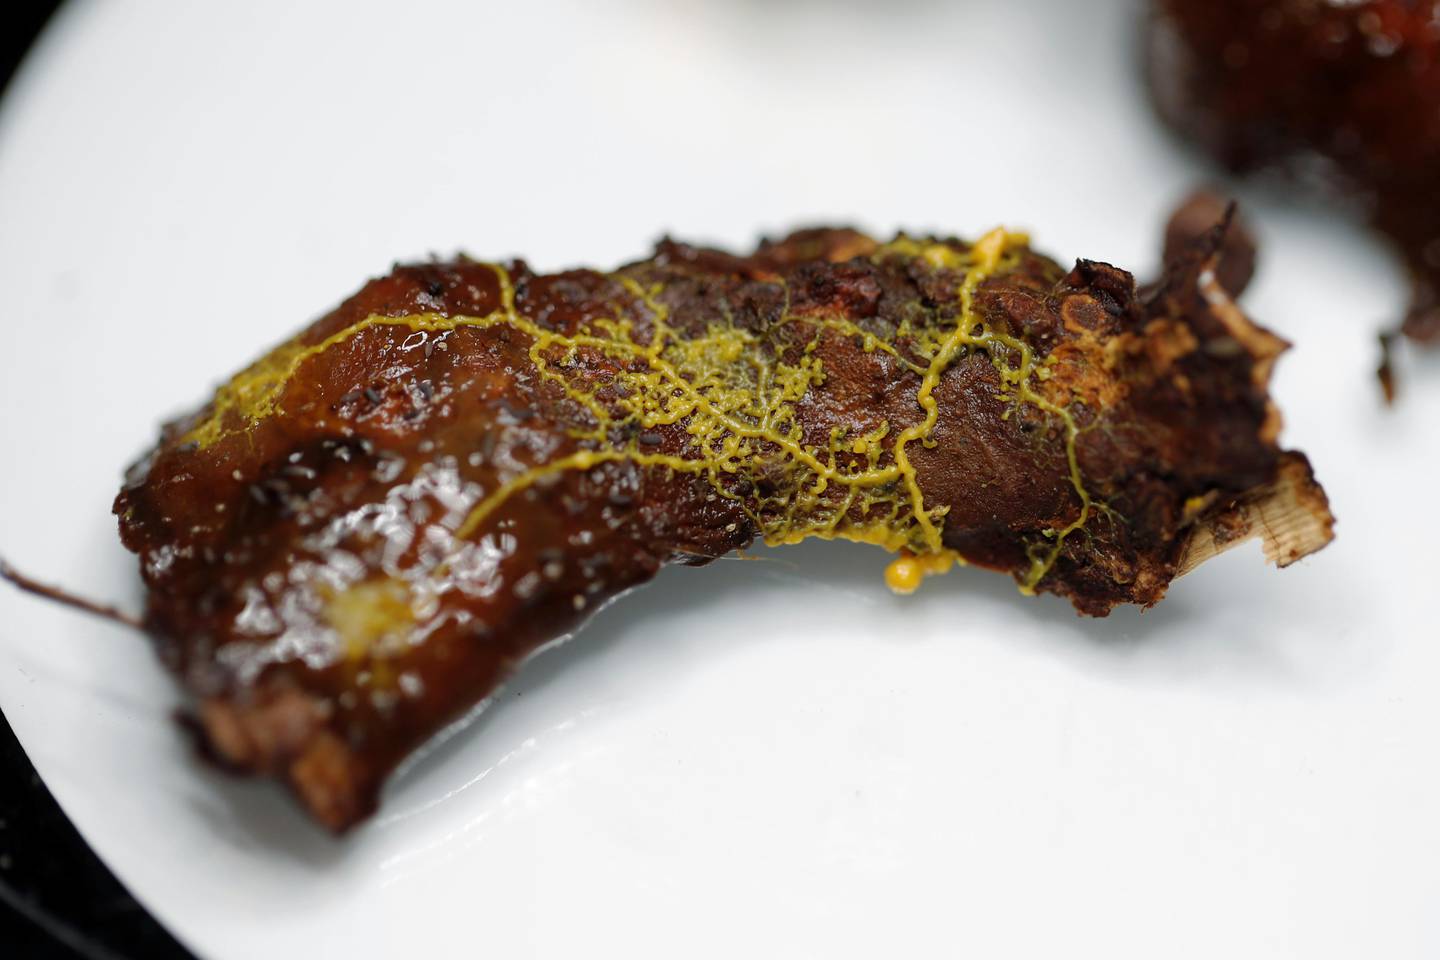 The "blob", slime mould (Physarum polycephalum), a single-celled organism forming over a piece of tree chunk, is pictured at the Paris Zoological Park during a press preview in Paris, France, October 16, 2019. REUTERS/Benoit Tessier